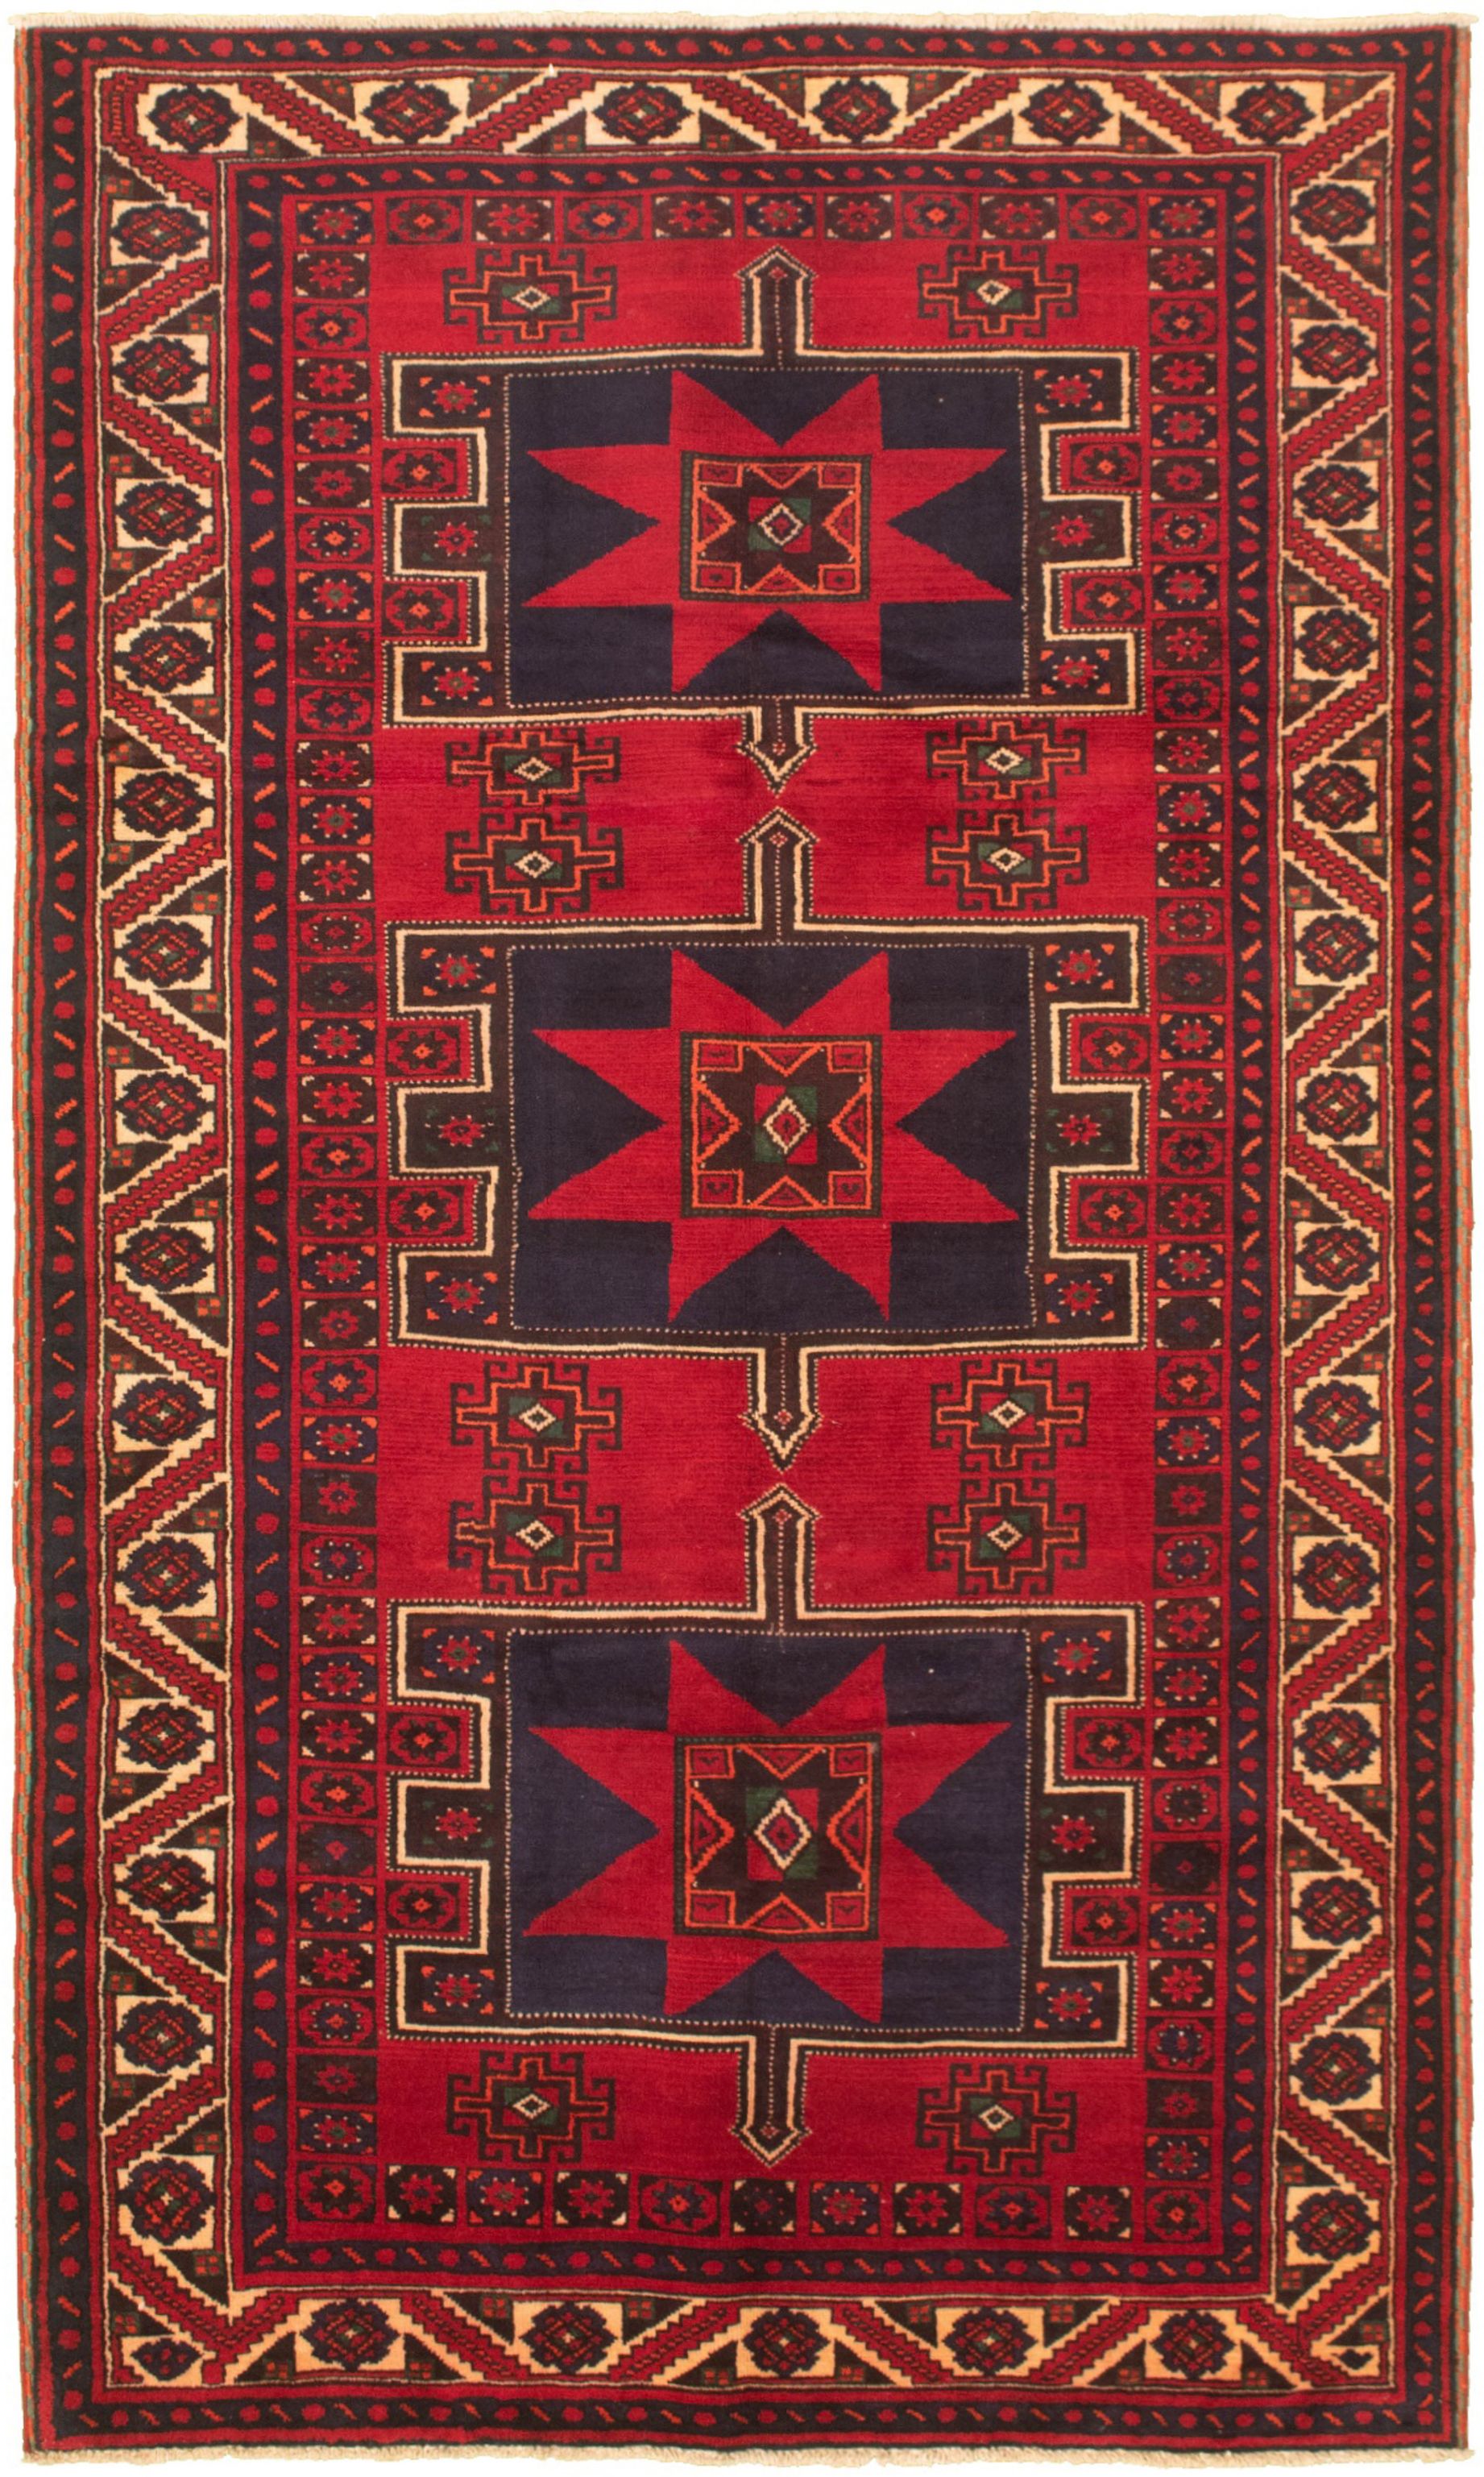 Hand-knotted Authentic Turkish Red Wool Rug 5'3" x 9'9"  Size: 5'3" x 9'9"  